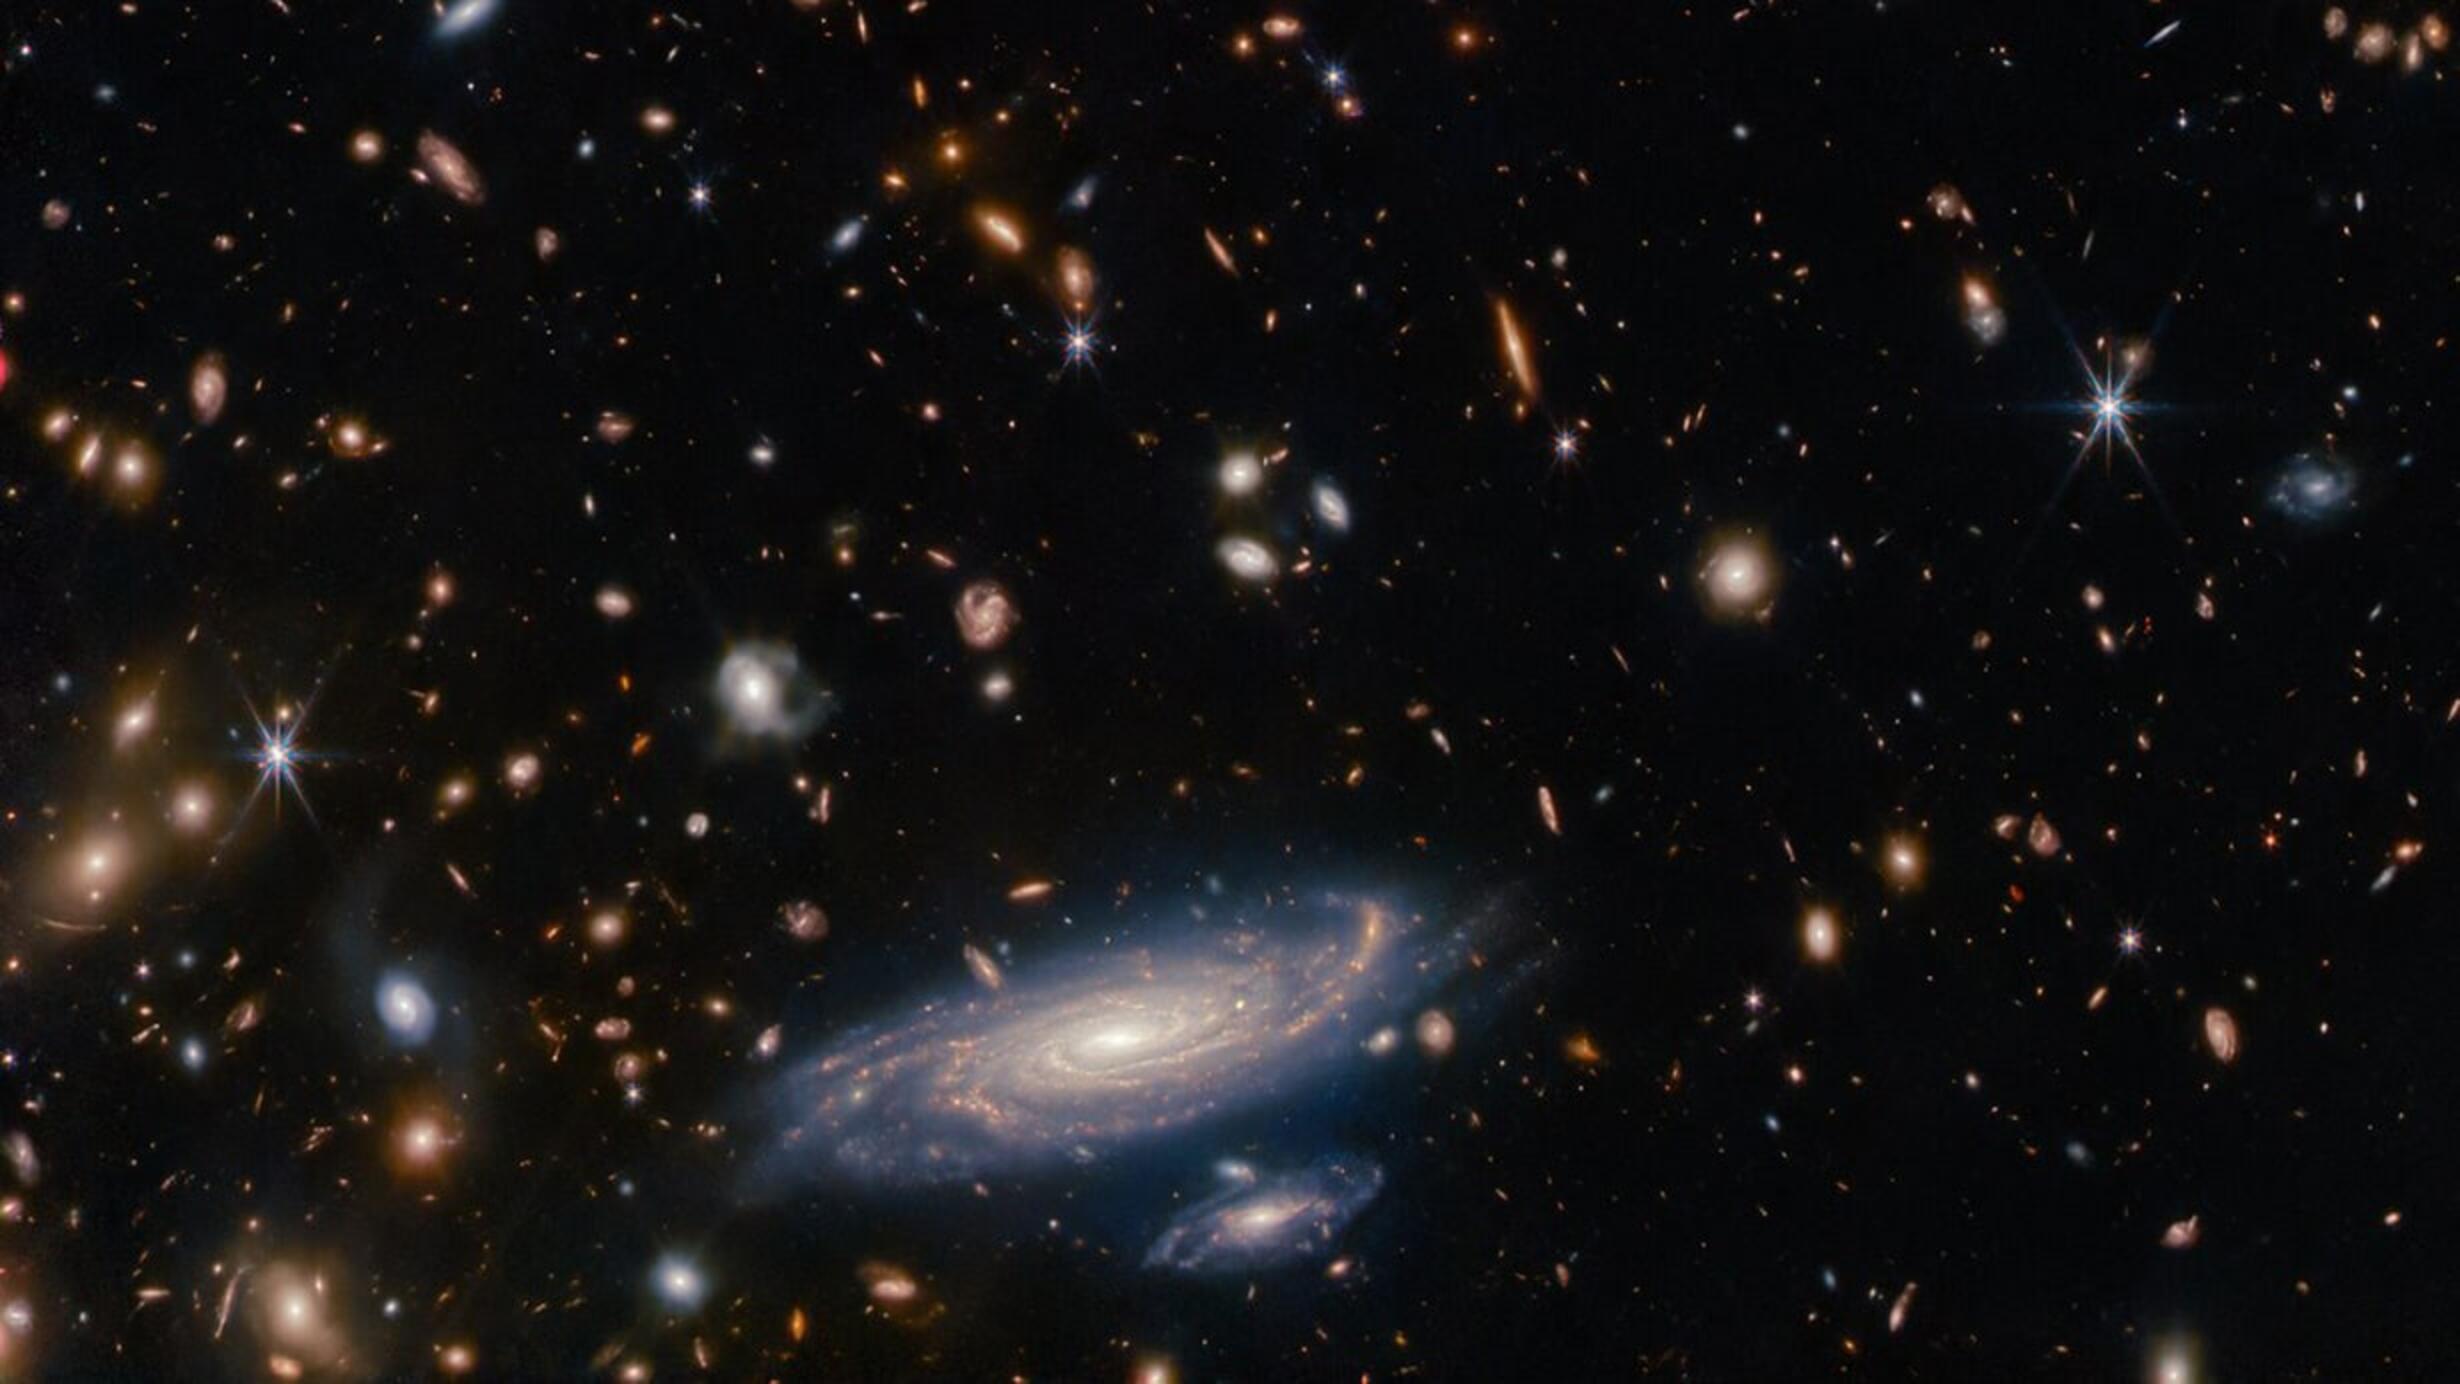 Many stars and galaxies lie on a dark background, in a variety of colours but mostly shades of orange. Some are large enough to make out spiral arms.